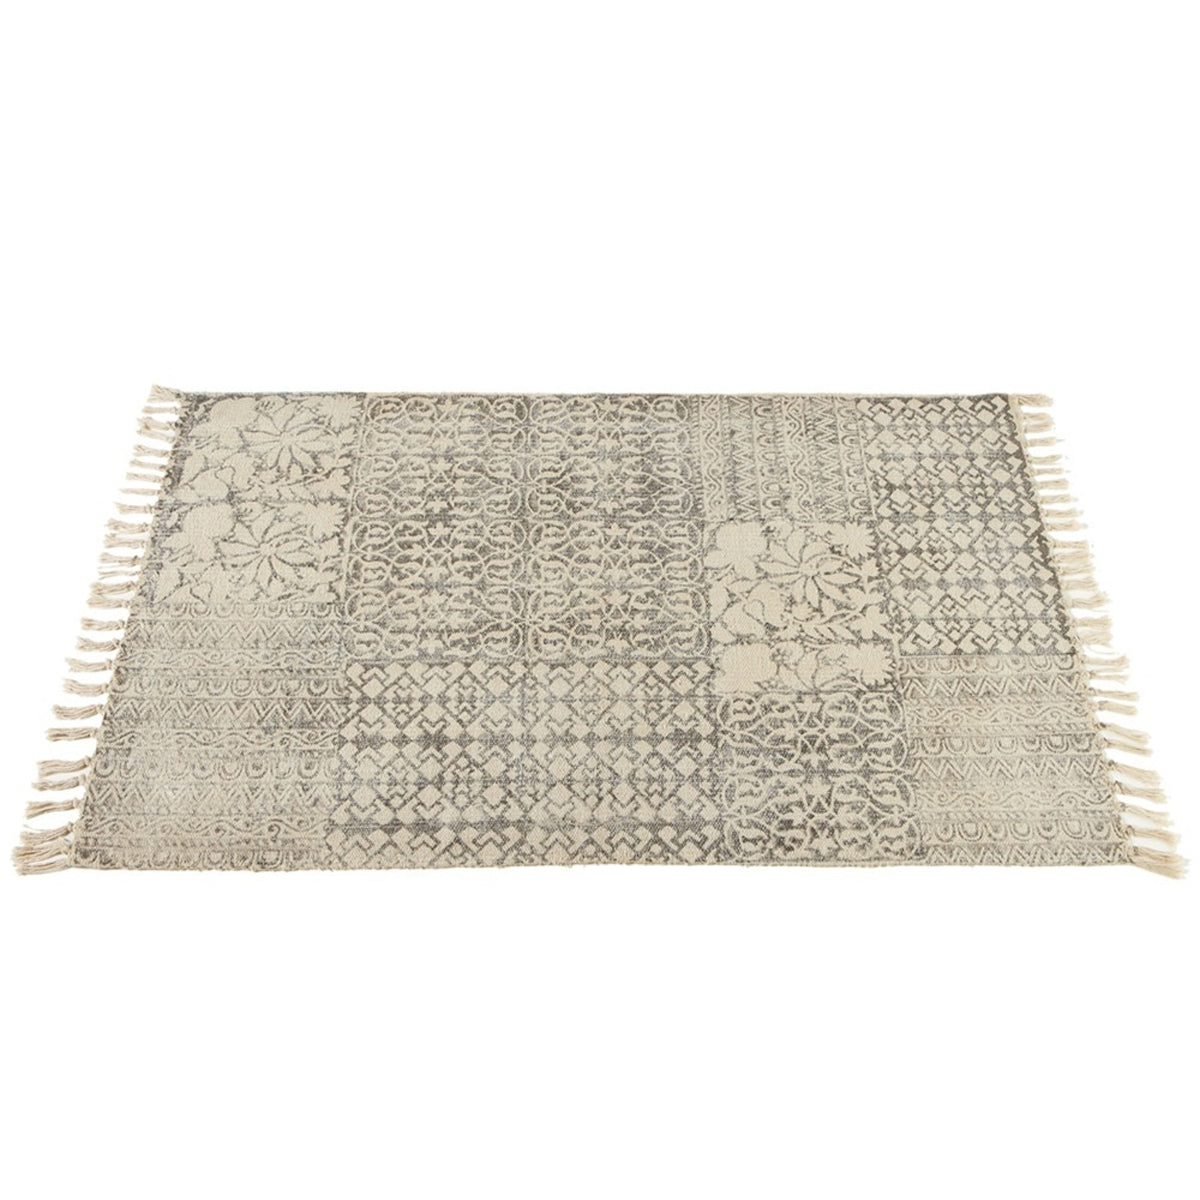 Block Print Gray and Cream Geometric & Floral Fringed Rug